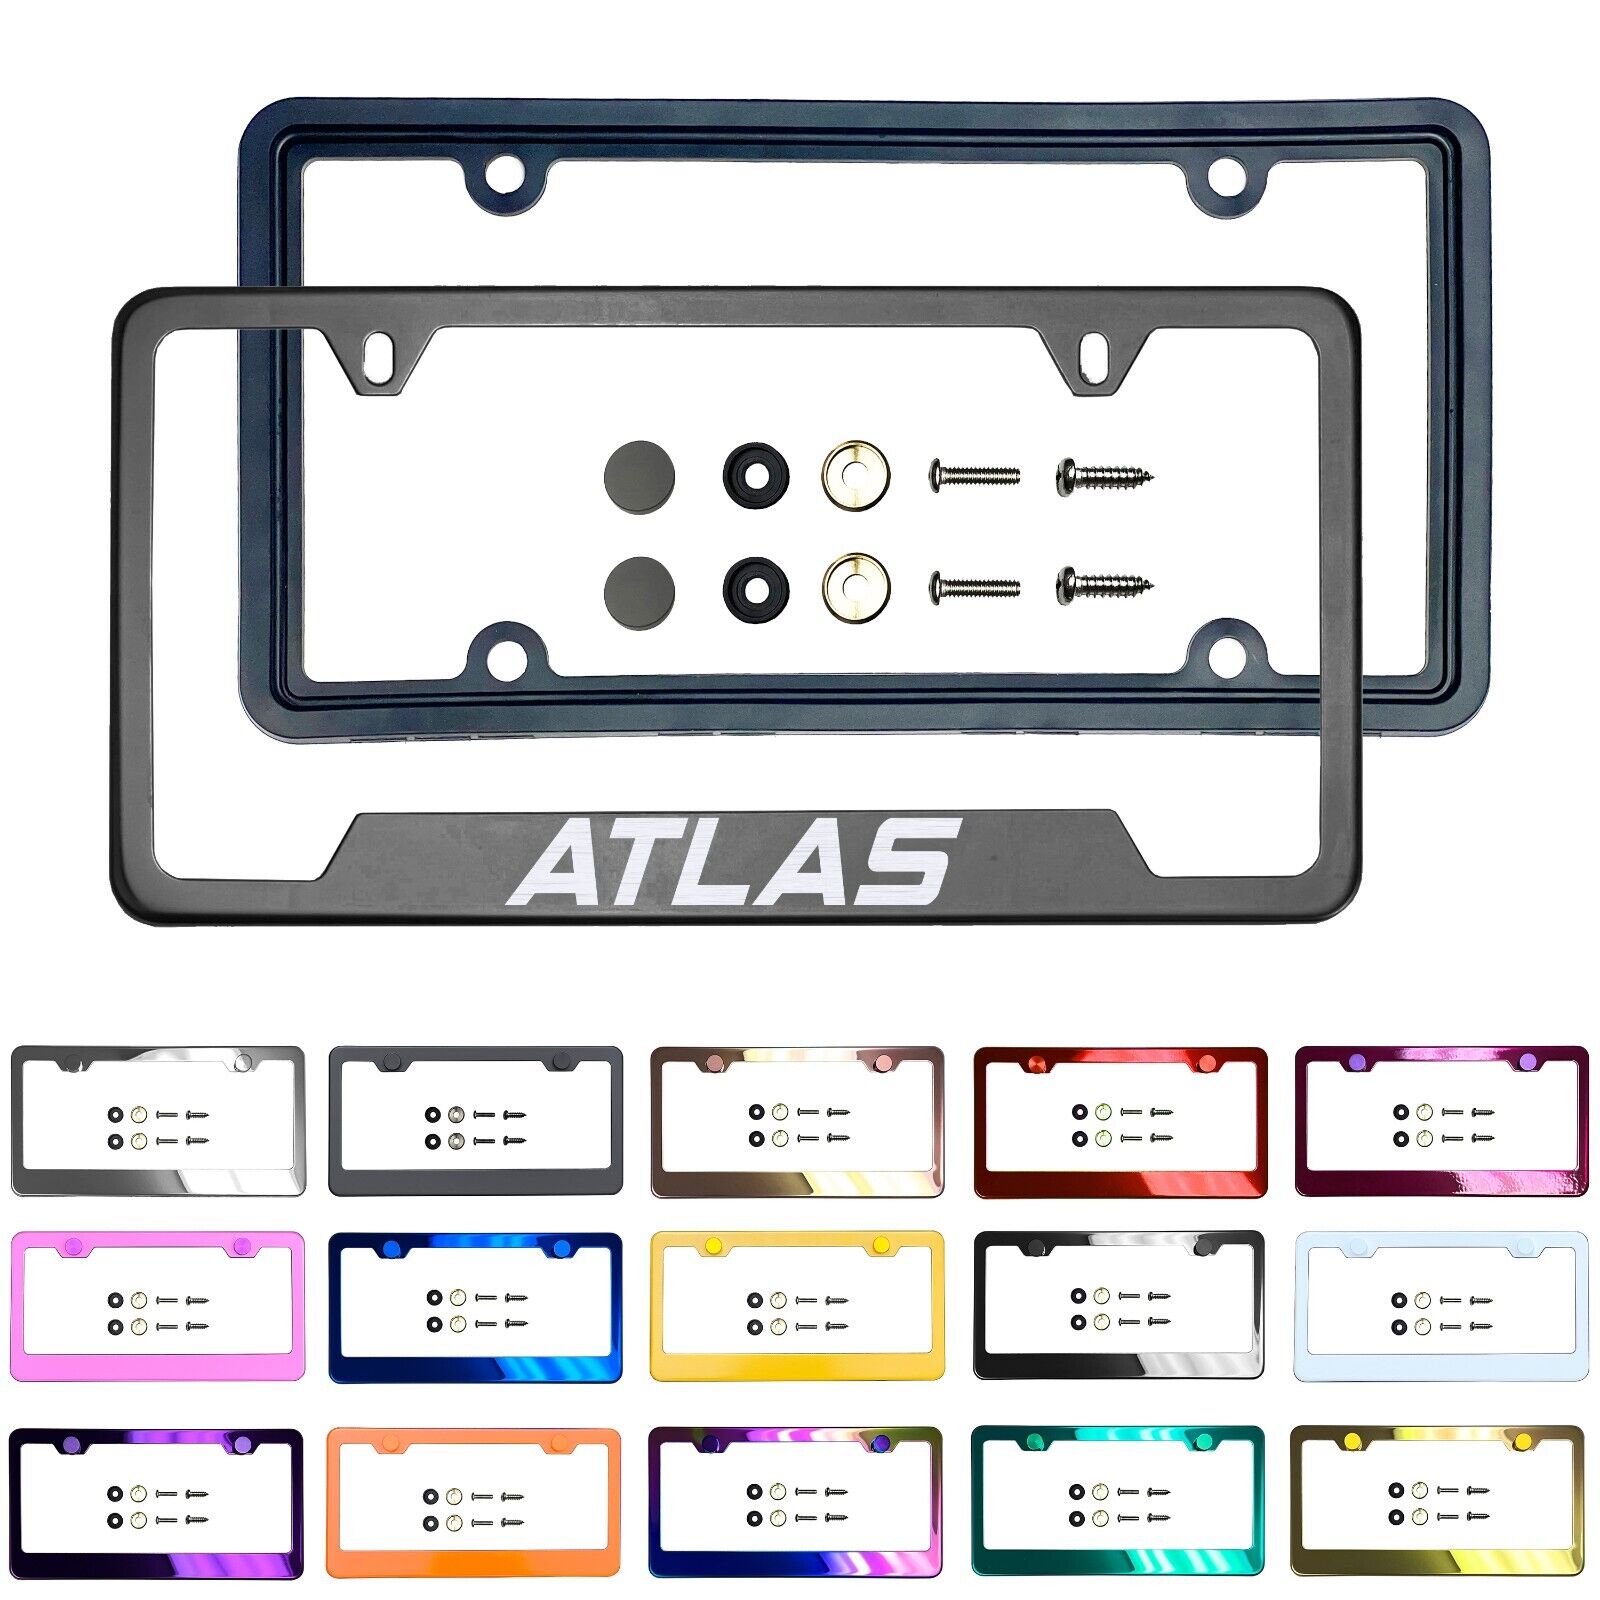 Laser Etched Customize Stainless Steel License Frame Silicone Guard Fit Atlas